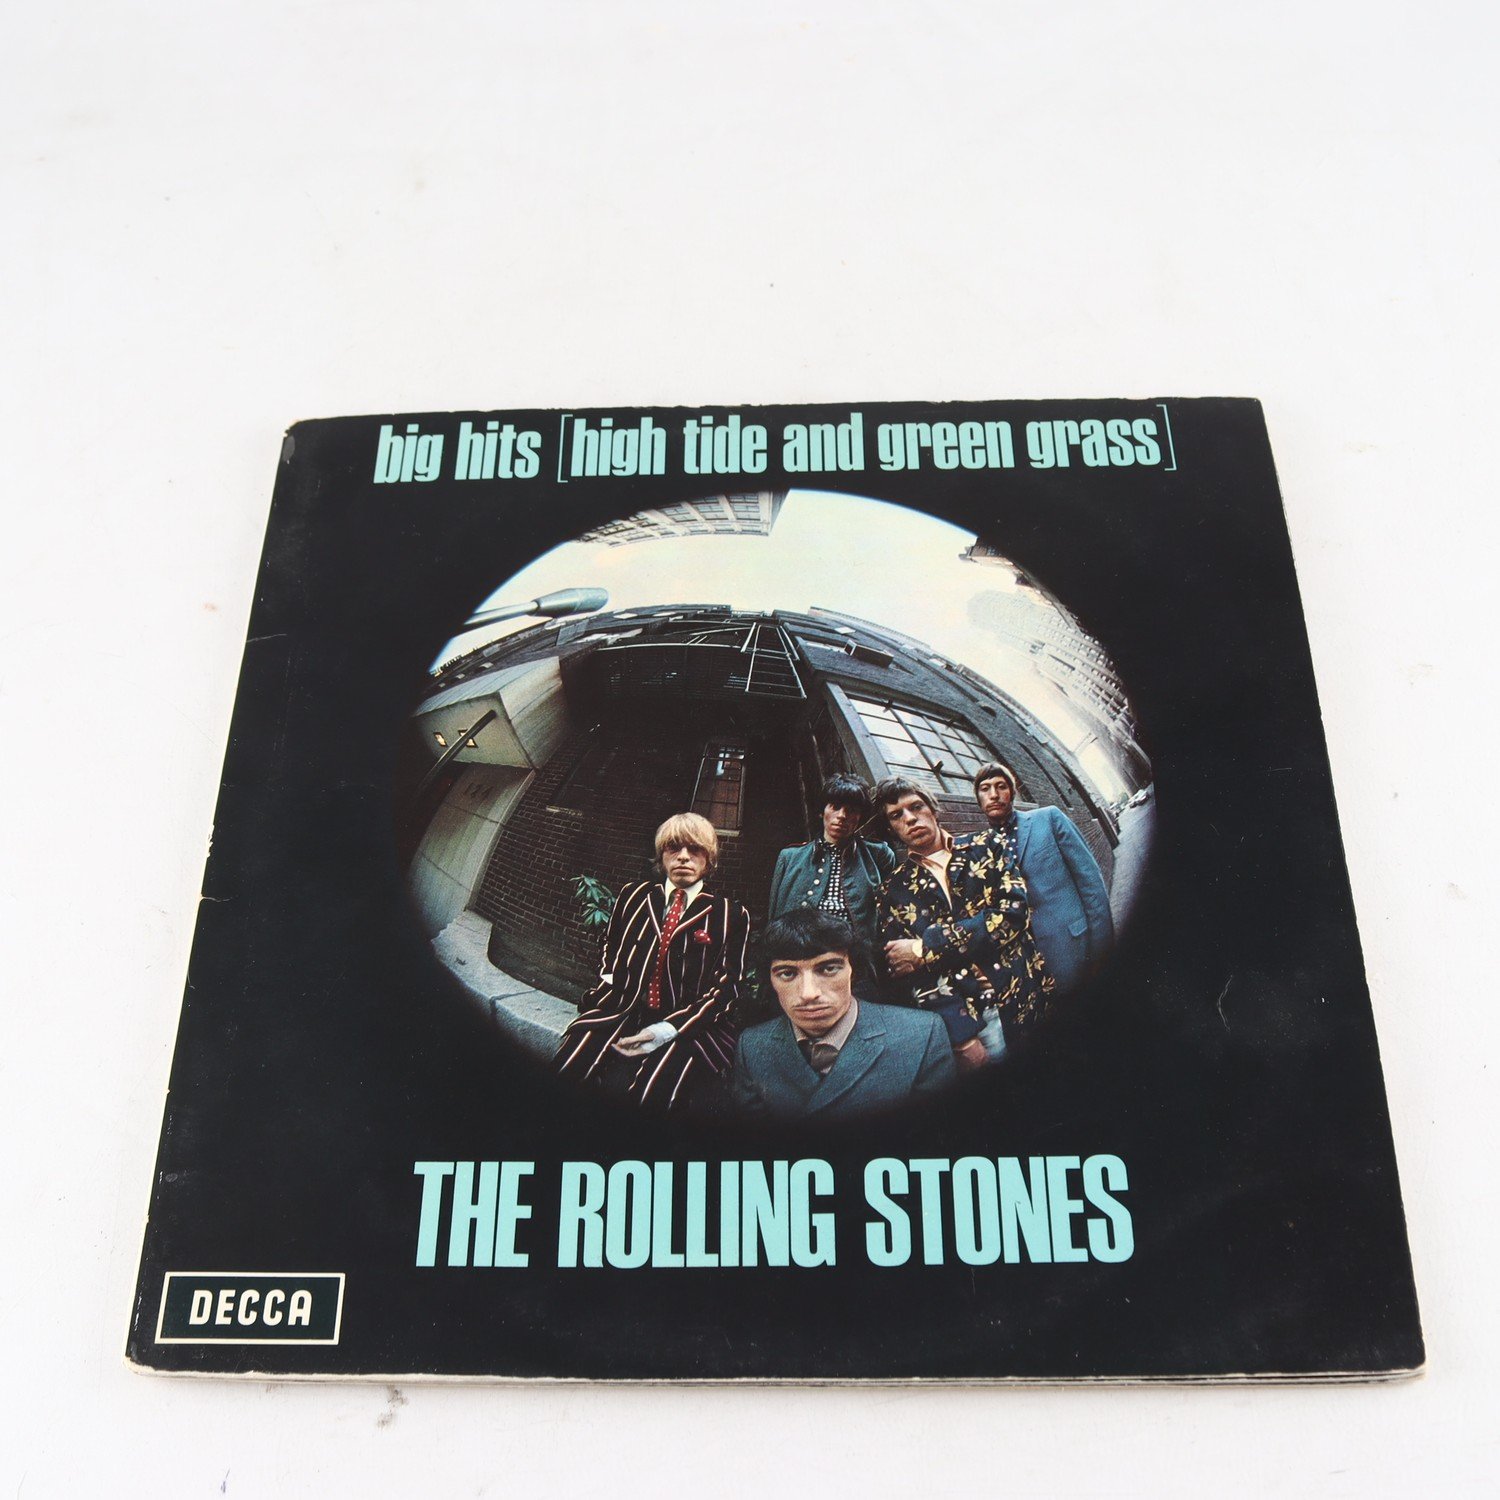 LP The Rolling Stones, Big Hits (High Tide And Green Grass)